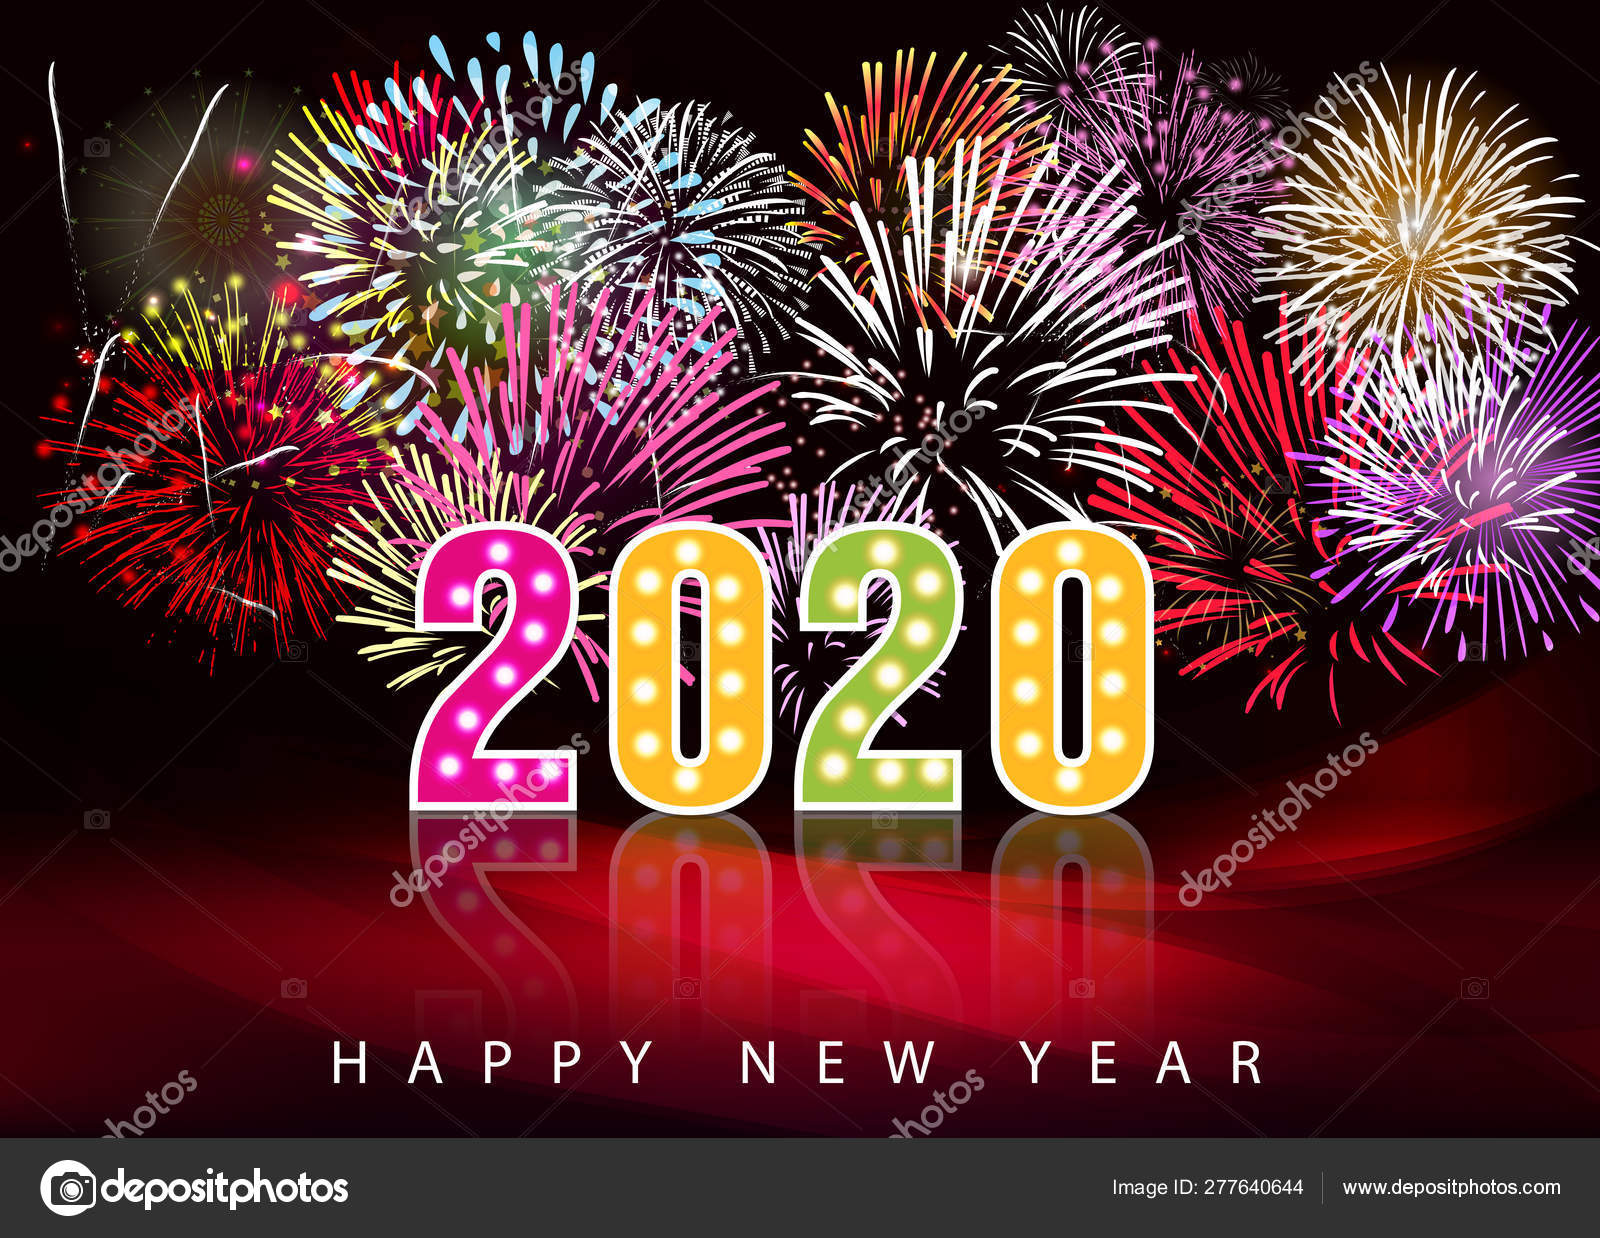 Happy New Year 2020 Merry Christmas — Stock Vector © kimminthien #277640644